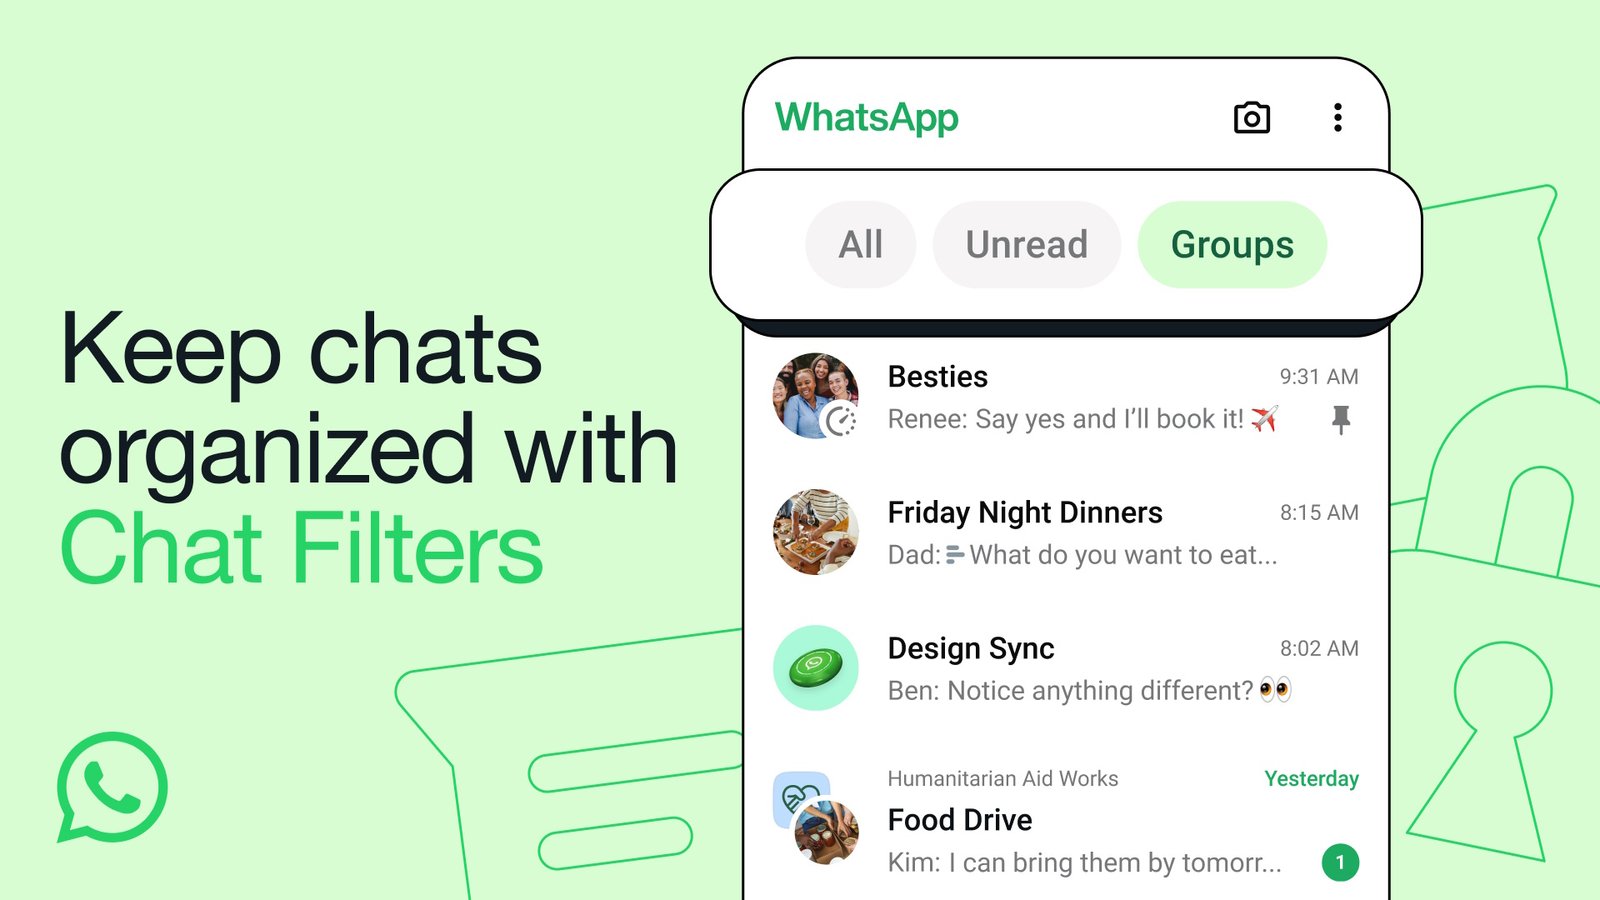 WhatsApp’s new chat filters make it easy to catch up on your unread messages